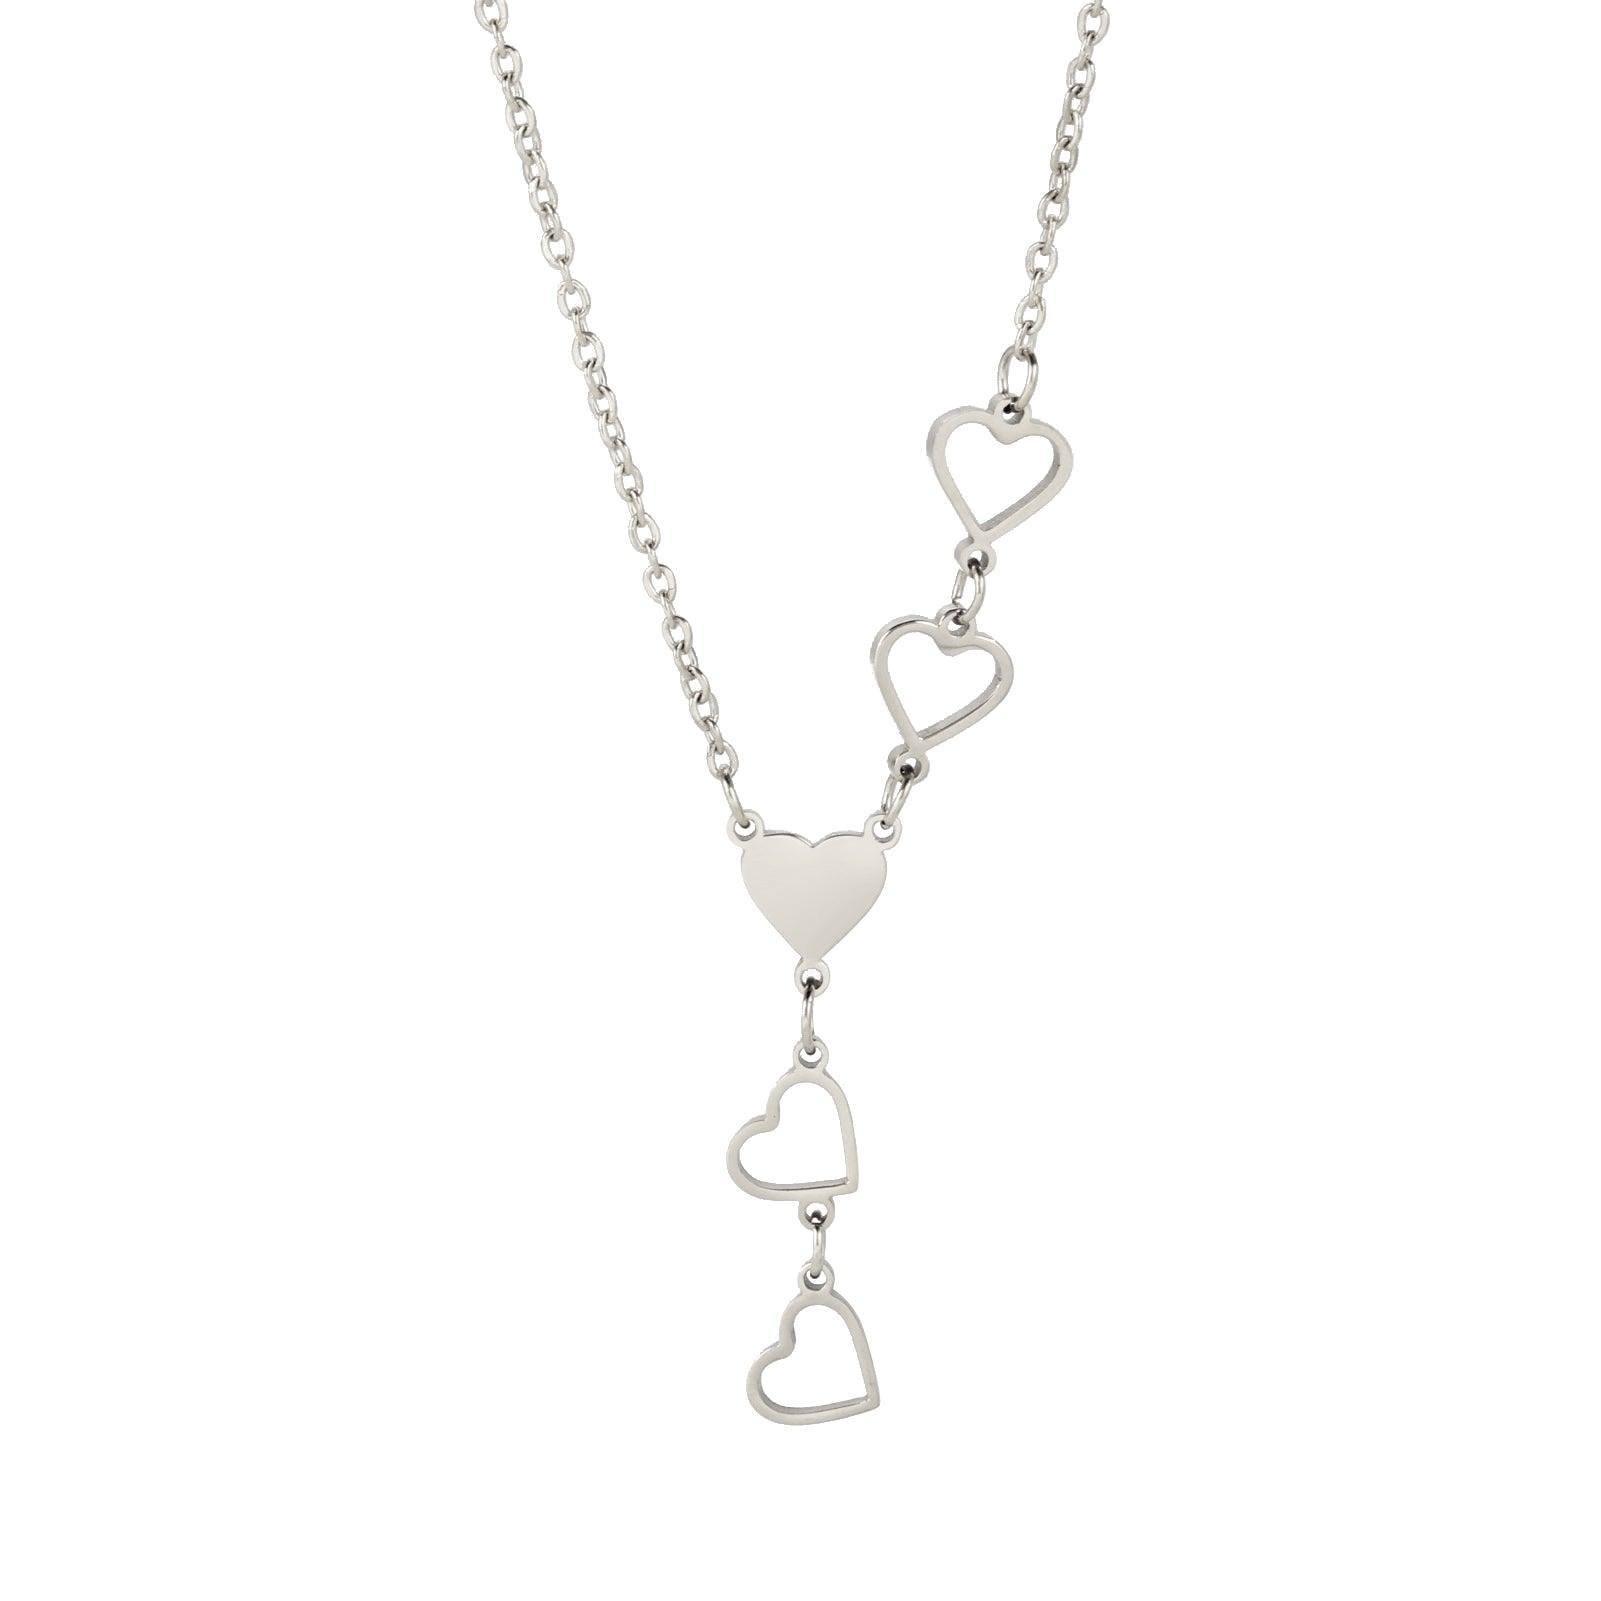 Chic Heart Chain Necklaces in Silver and Gold-A-11